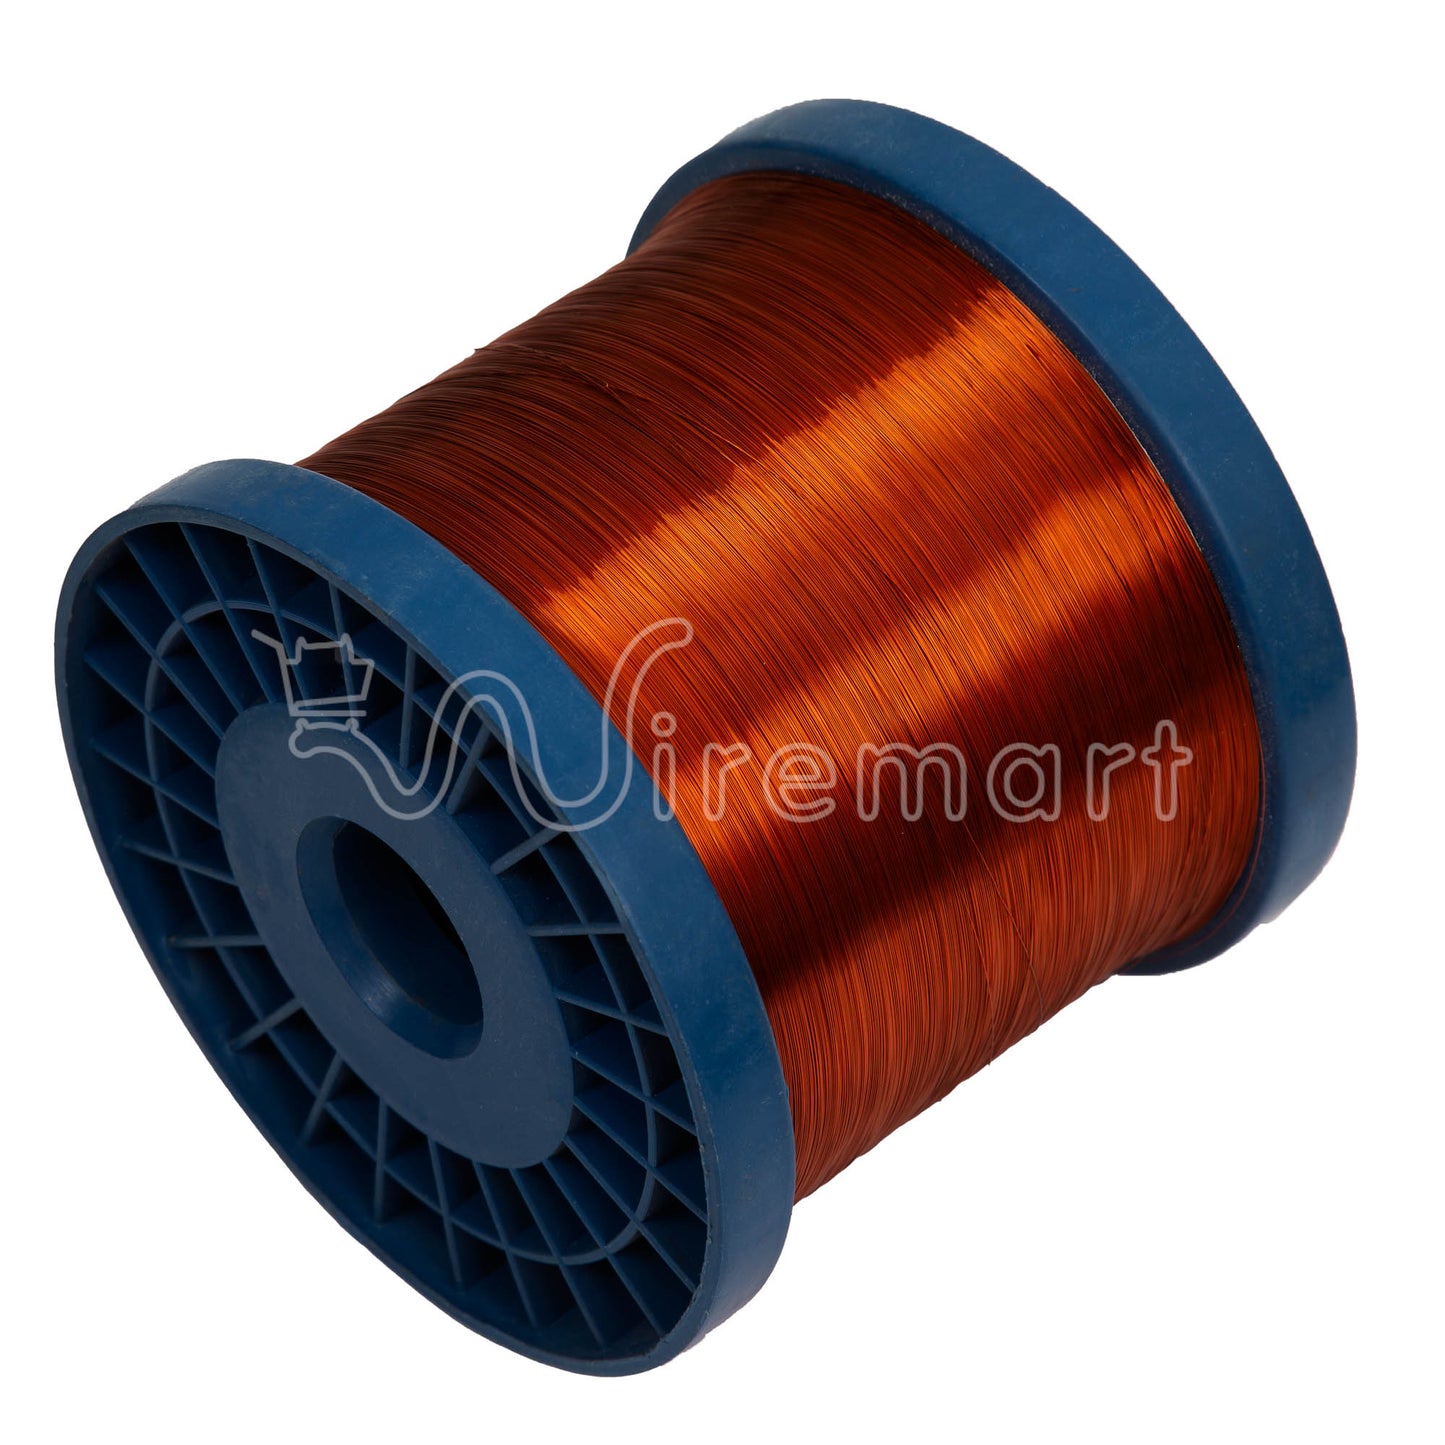 Sonali / Hindline Copper Winding Wires